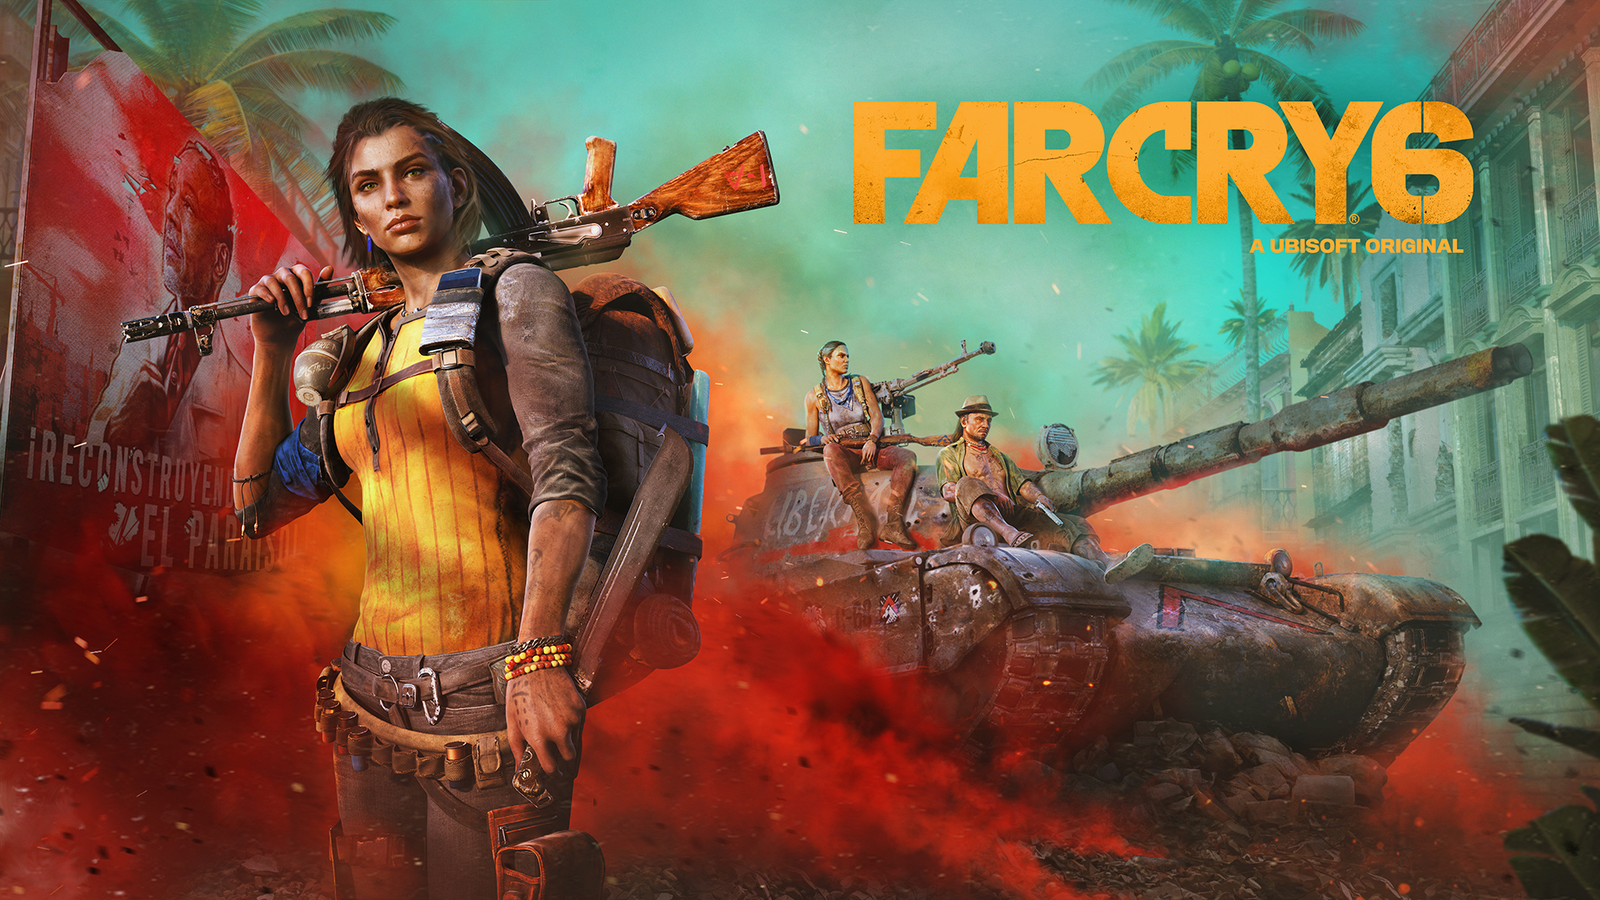 Far Cry 6: Lost Between Worlds - Xbox One, Xbox Series X